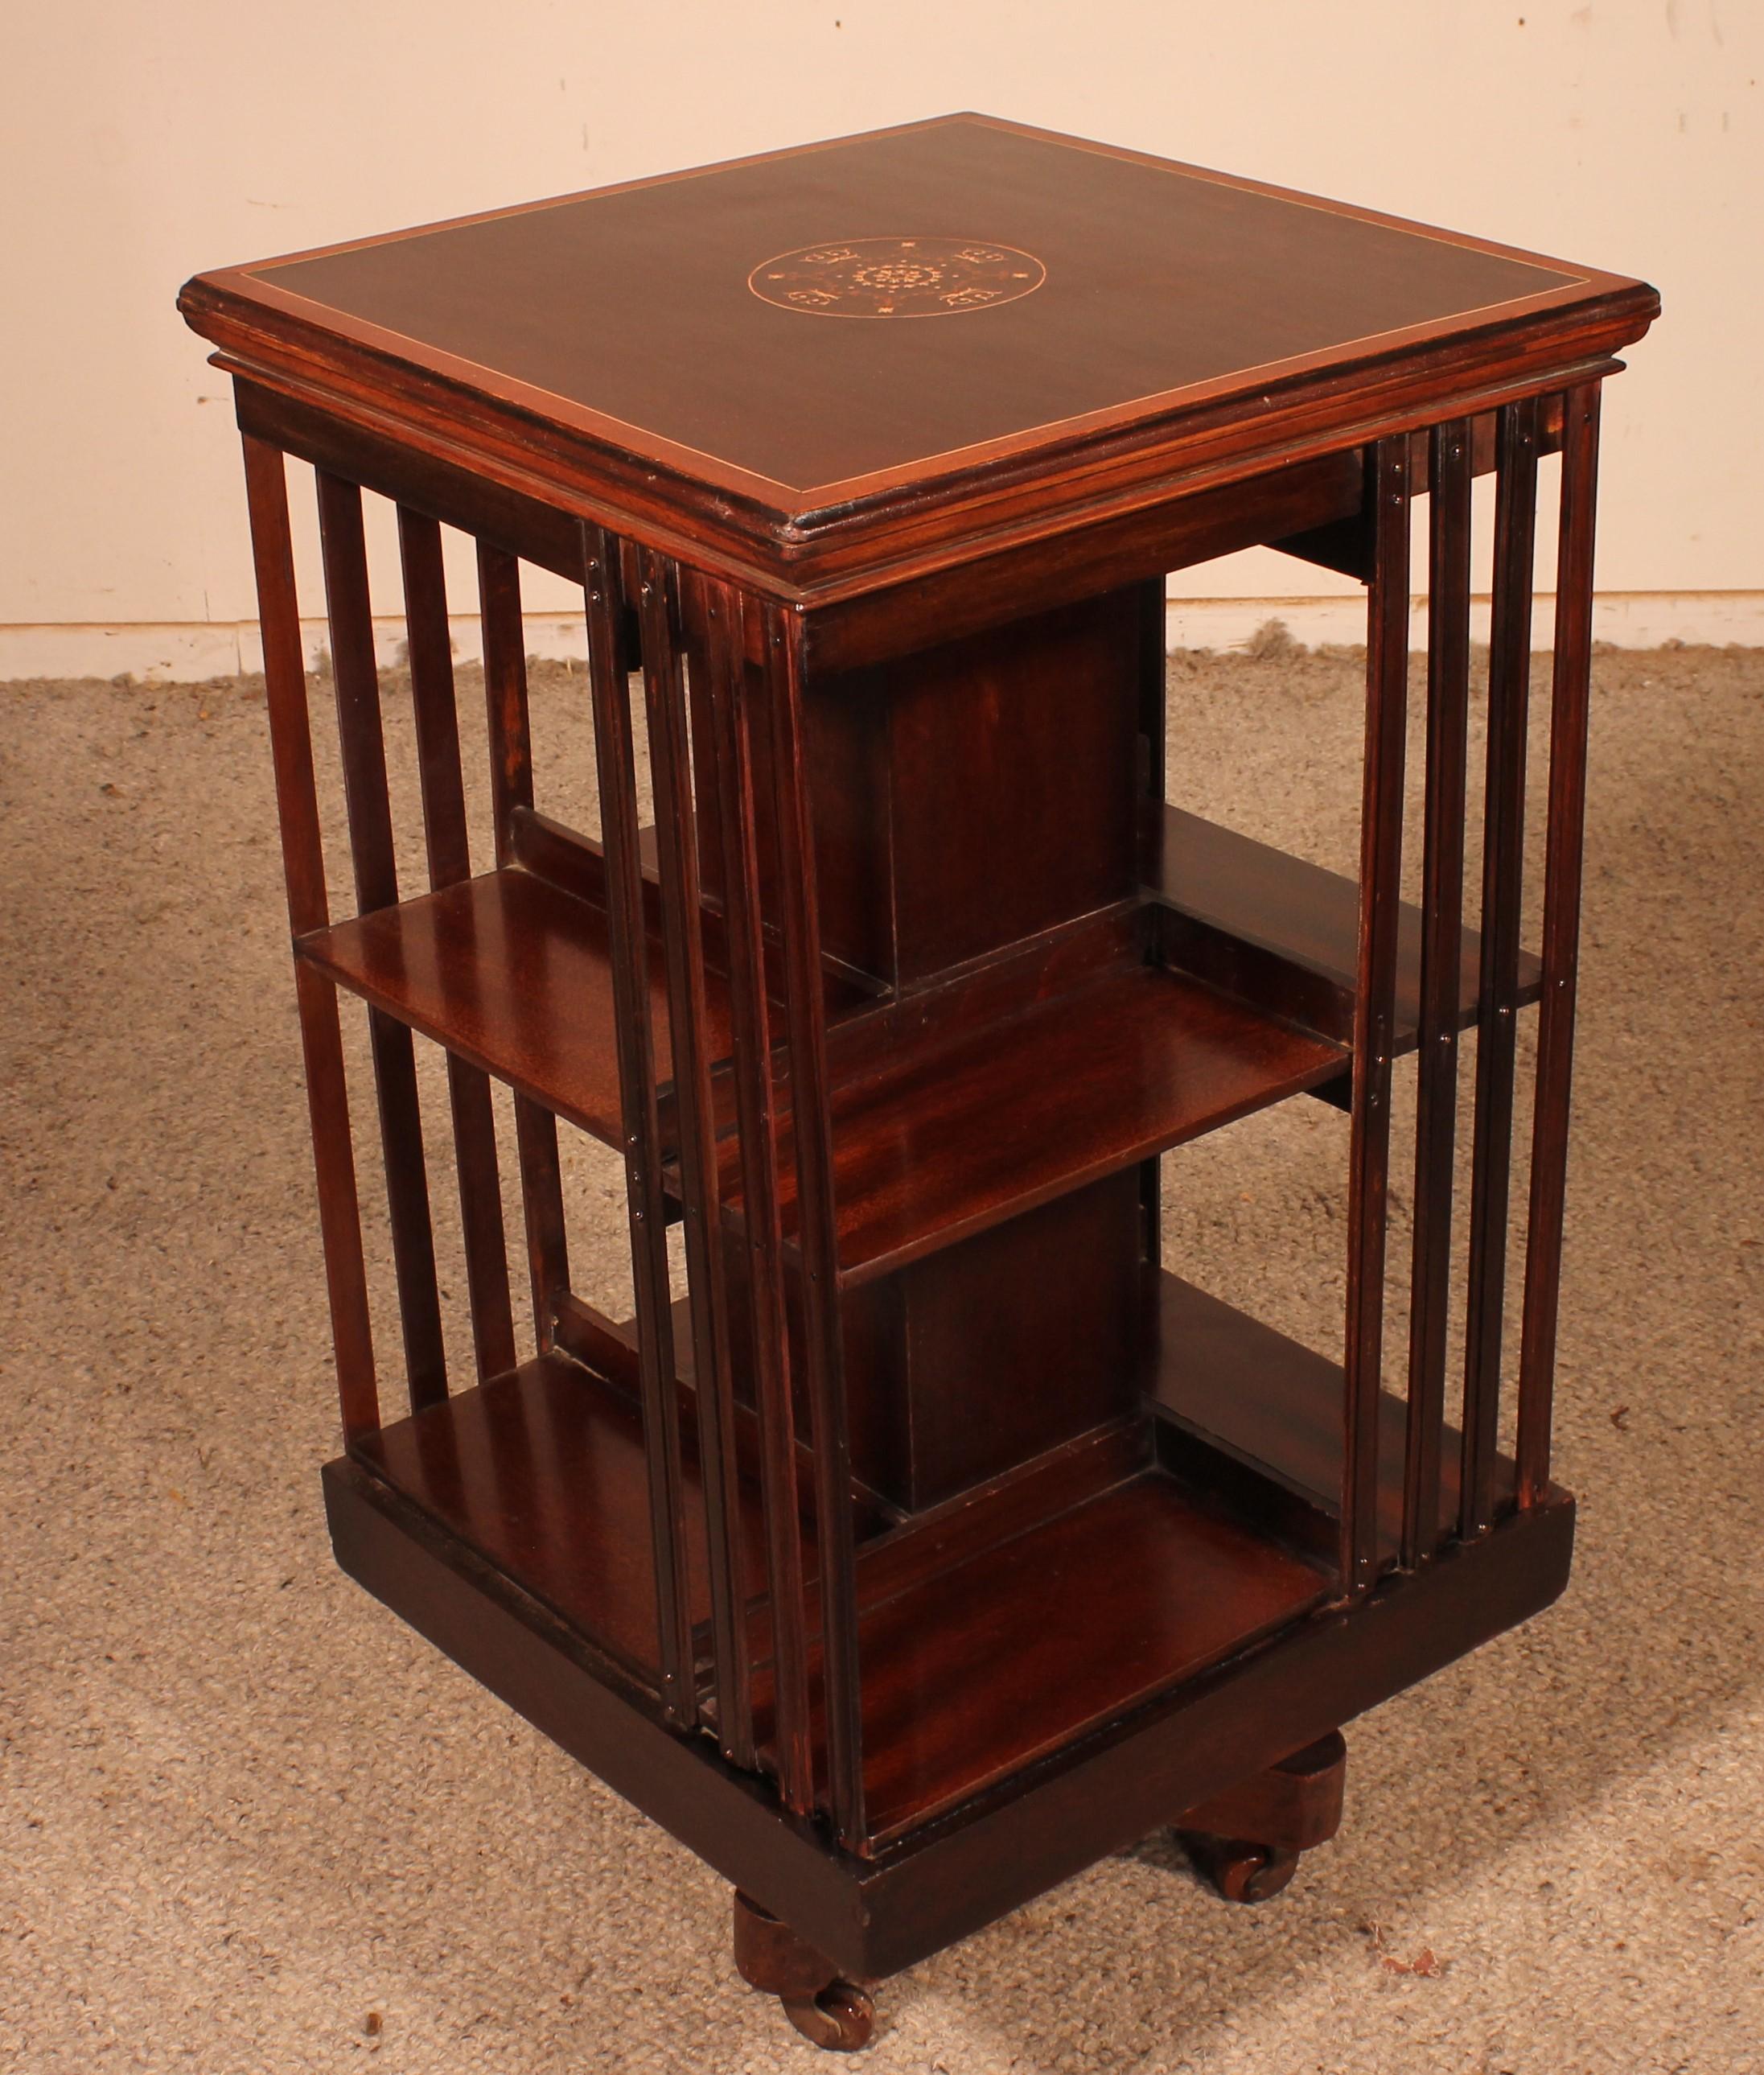 Elegant revolving bookcase in mahogany and inlays from the end of the 19th century from England.
Very beautiful mahogany bookcase which has a very beautiful table top with a medallion in marquetry as well as lemon tree inlays.

Very beautiful